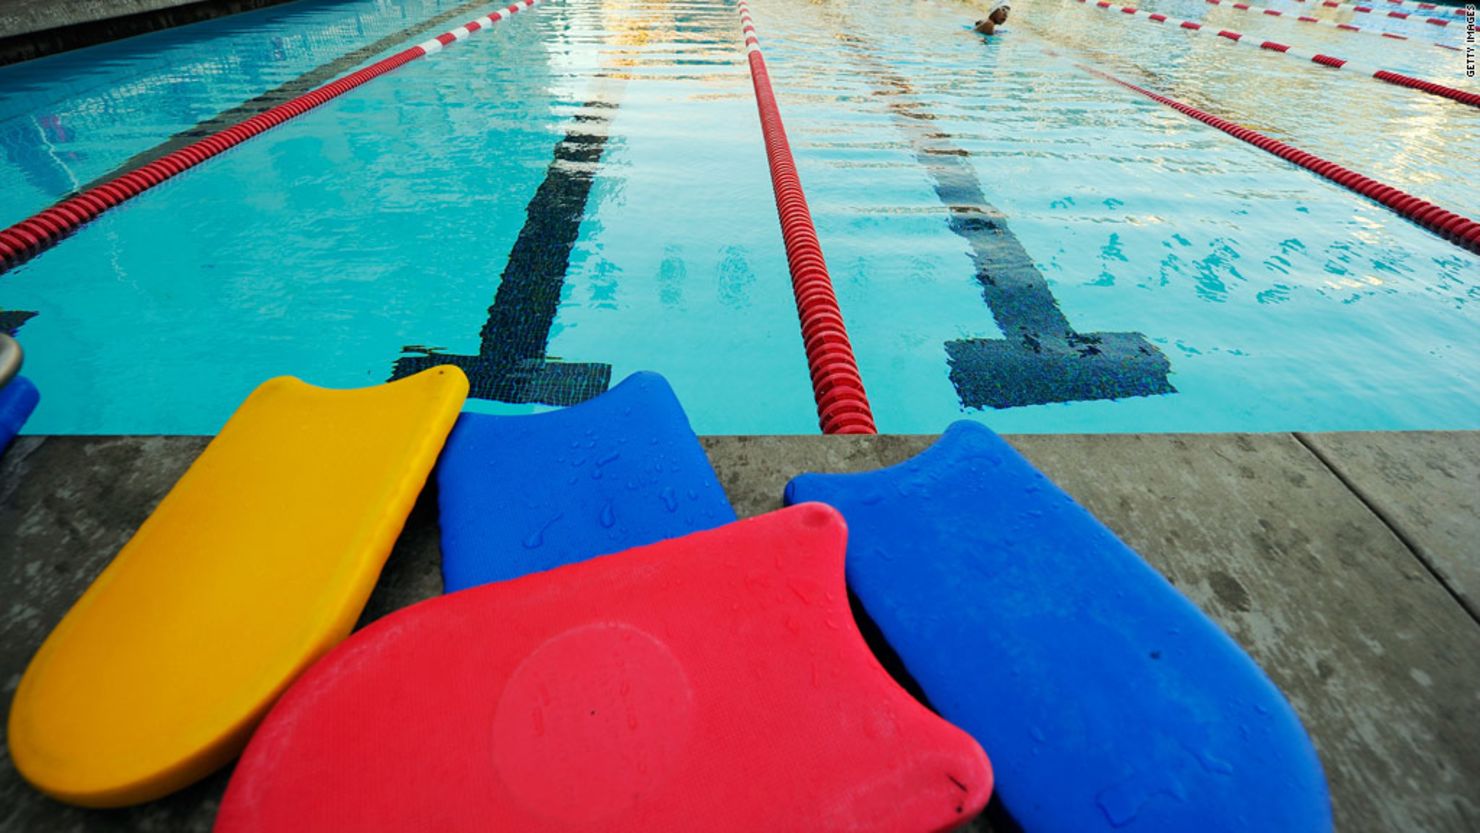 It's important for swimmers to minimize the amount of contaminants in the water by showering beforehand.